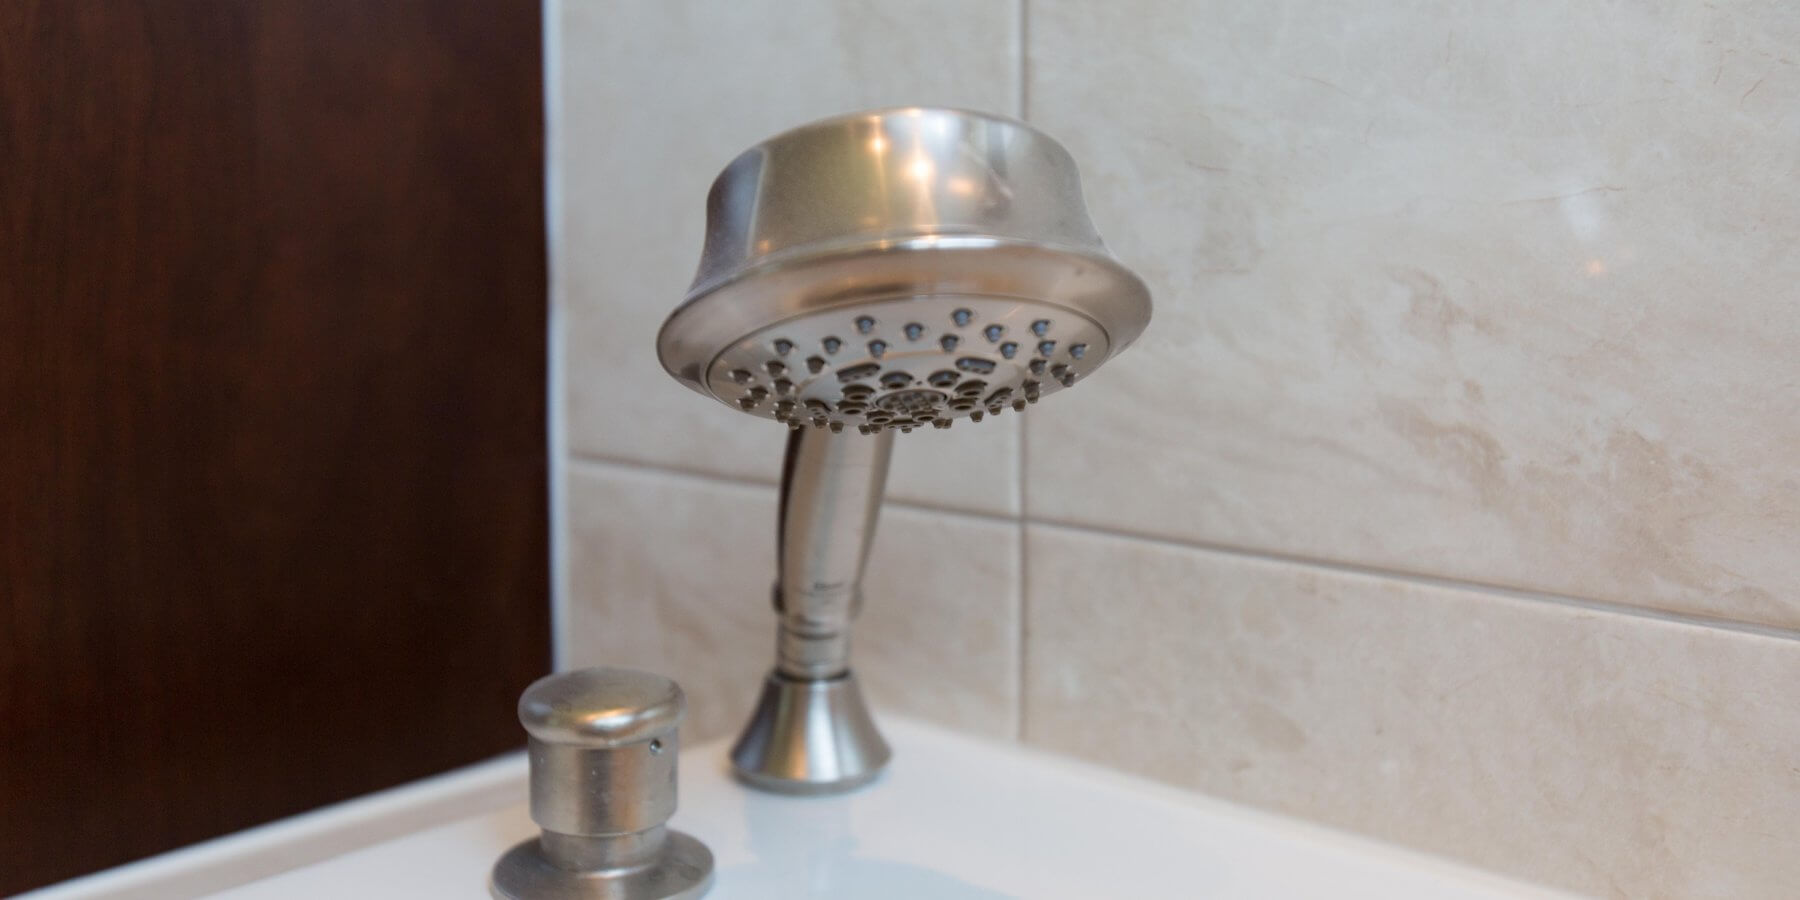 a close up of a shower head on a sink